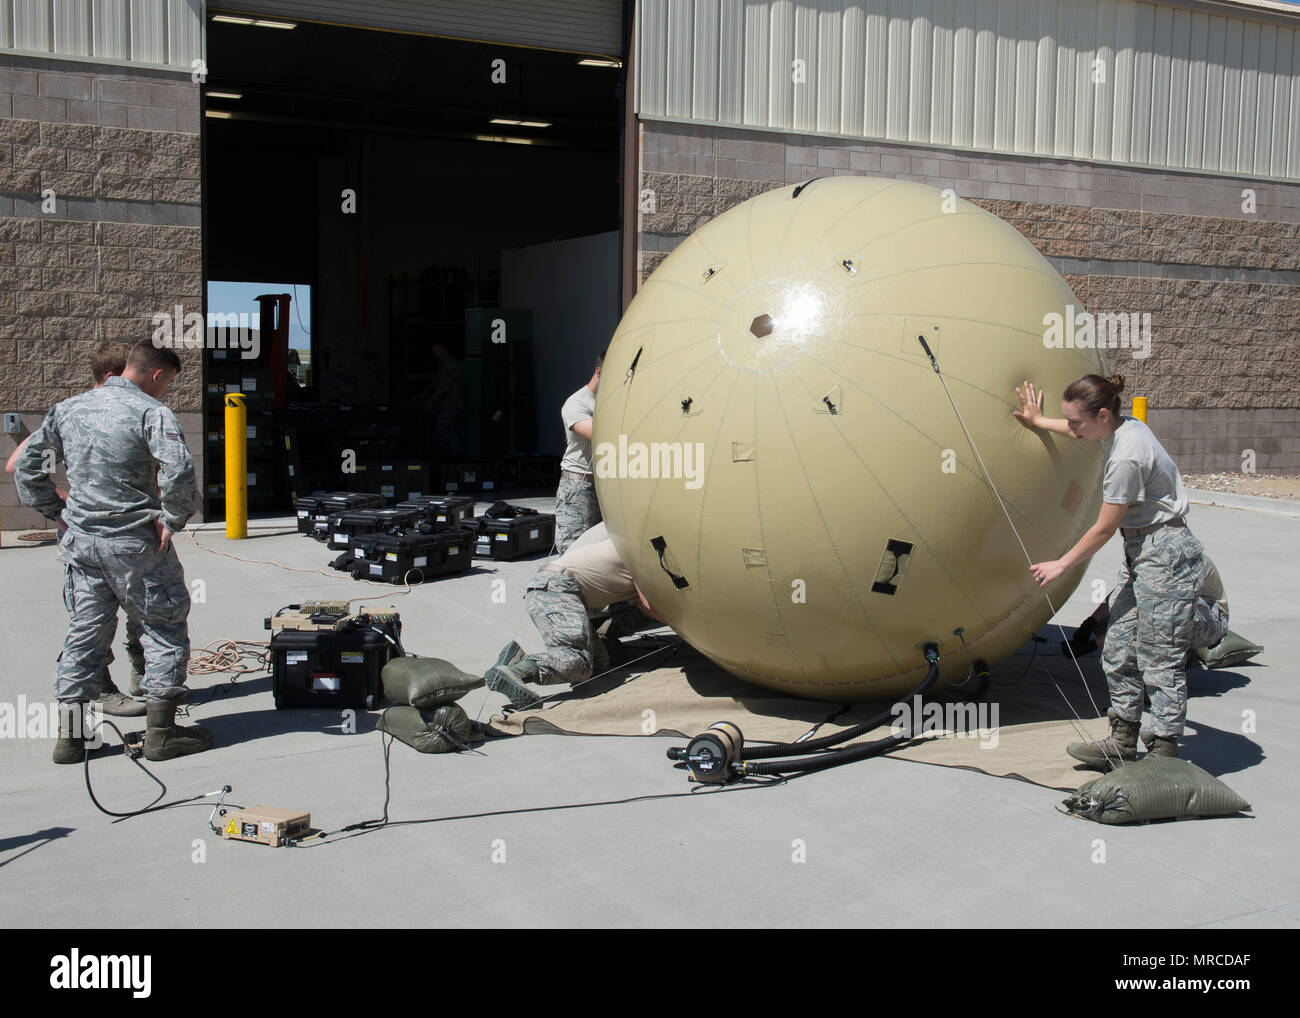 Members of the 726th Air Control Squadron assemble a Small Communications Package May 30, 2017, at Mountain Home Air Force Base, Idaho.  The inflatable system allows smaller teams to transport and employ it without relying on outside agencies. (U.S. Air Force photo by Airman 1st Class Jeremy D. Wolff/Released) Stock Photo